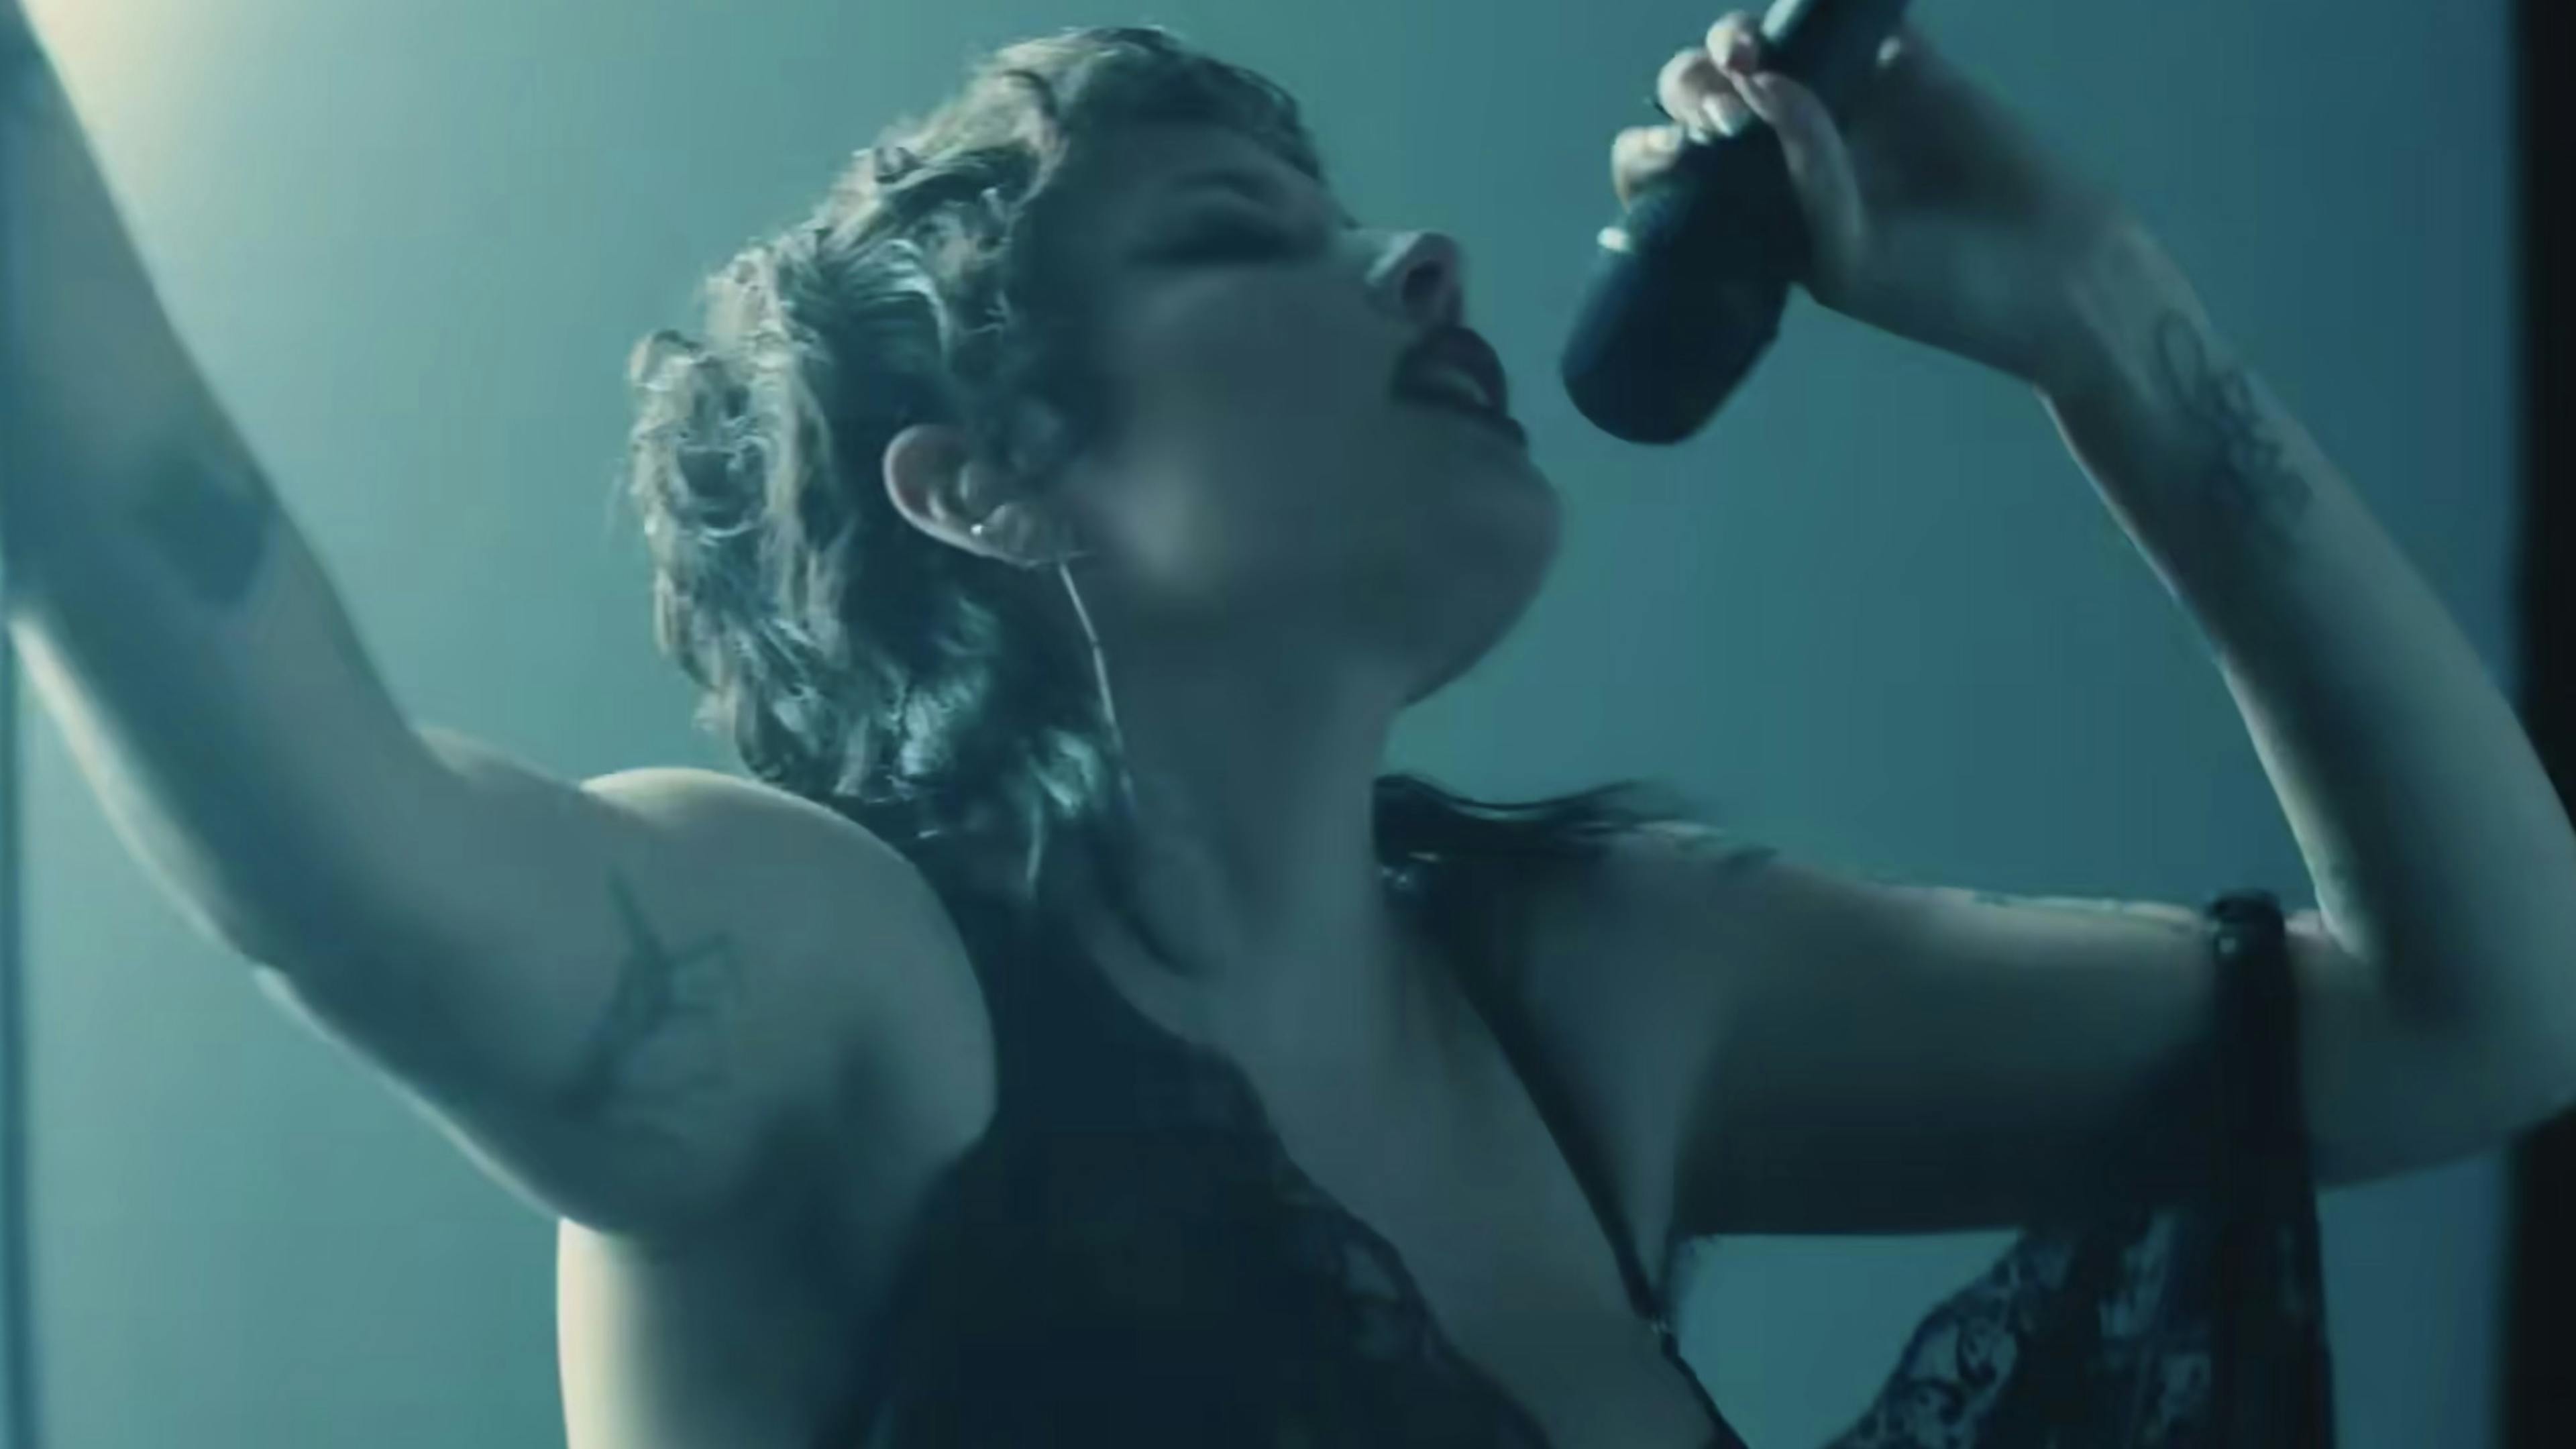 Watch Halsey’s frenzied new video for Easier Than Lying